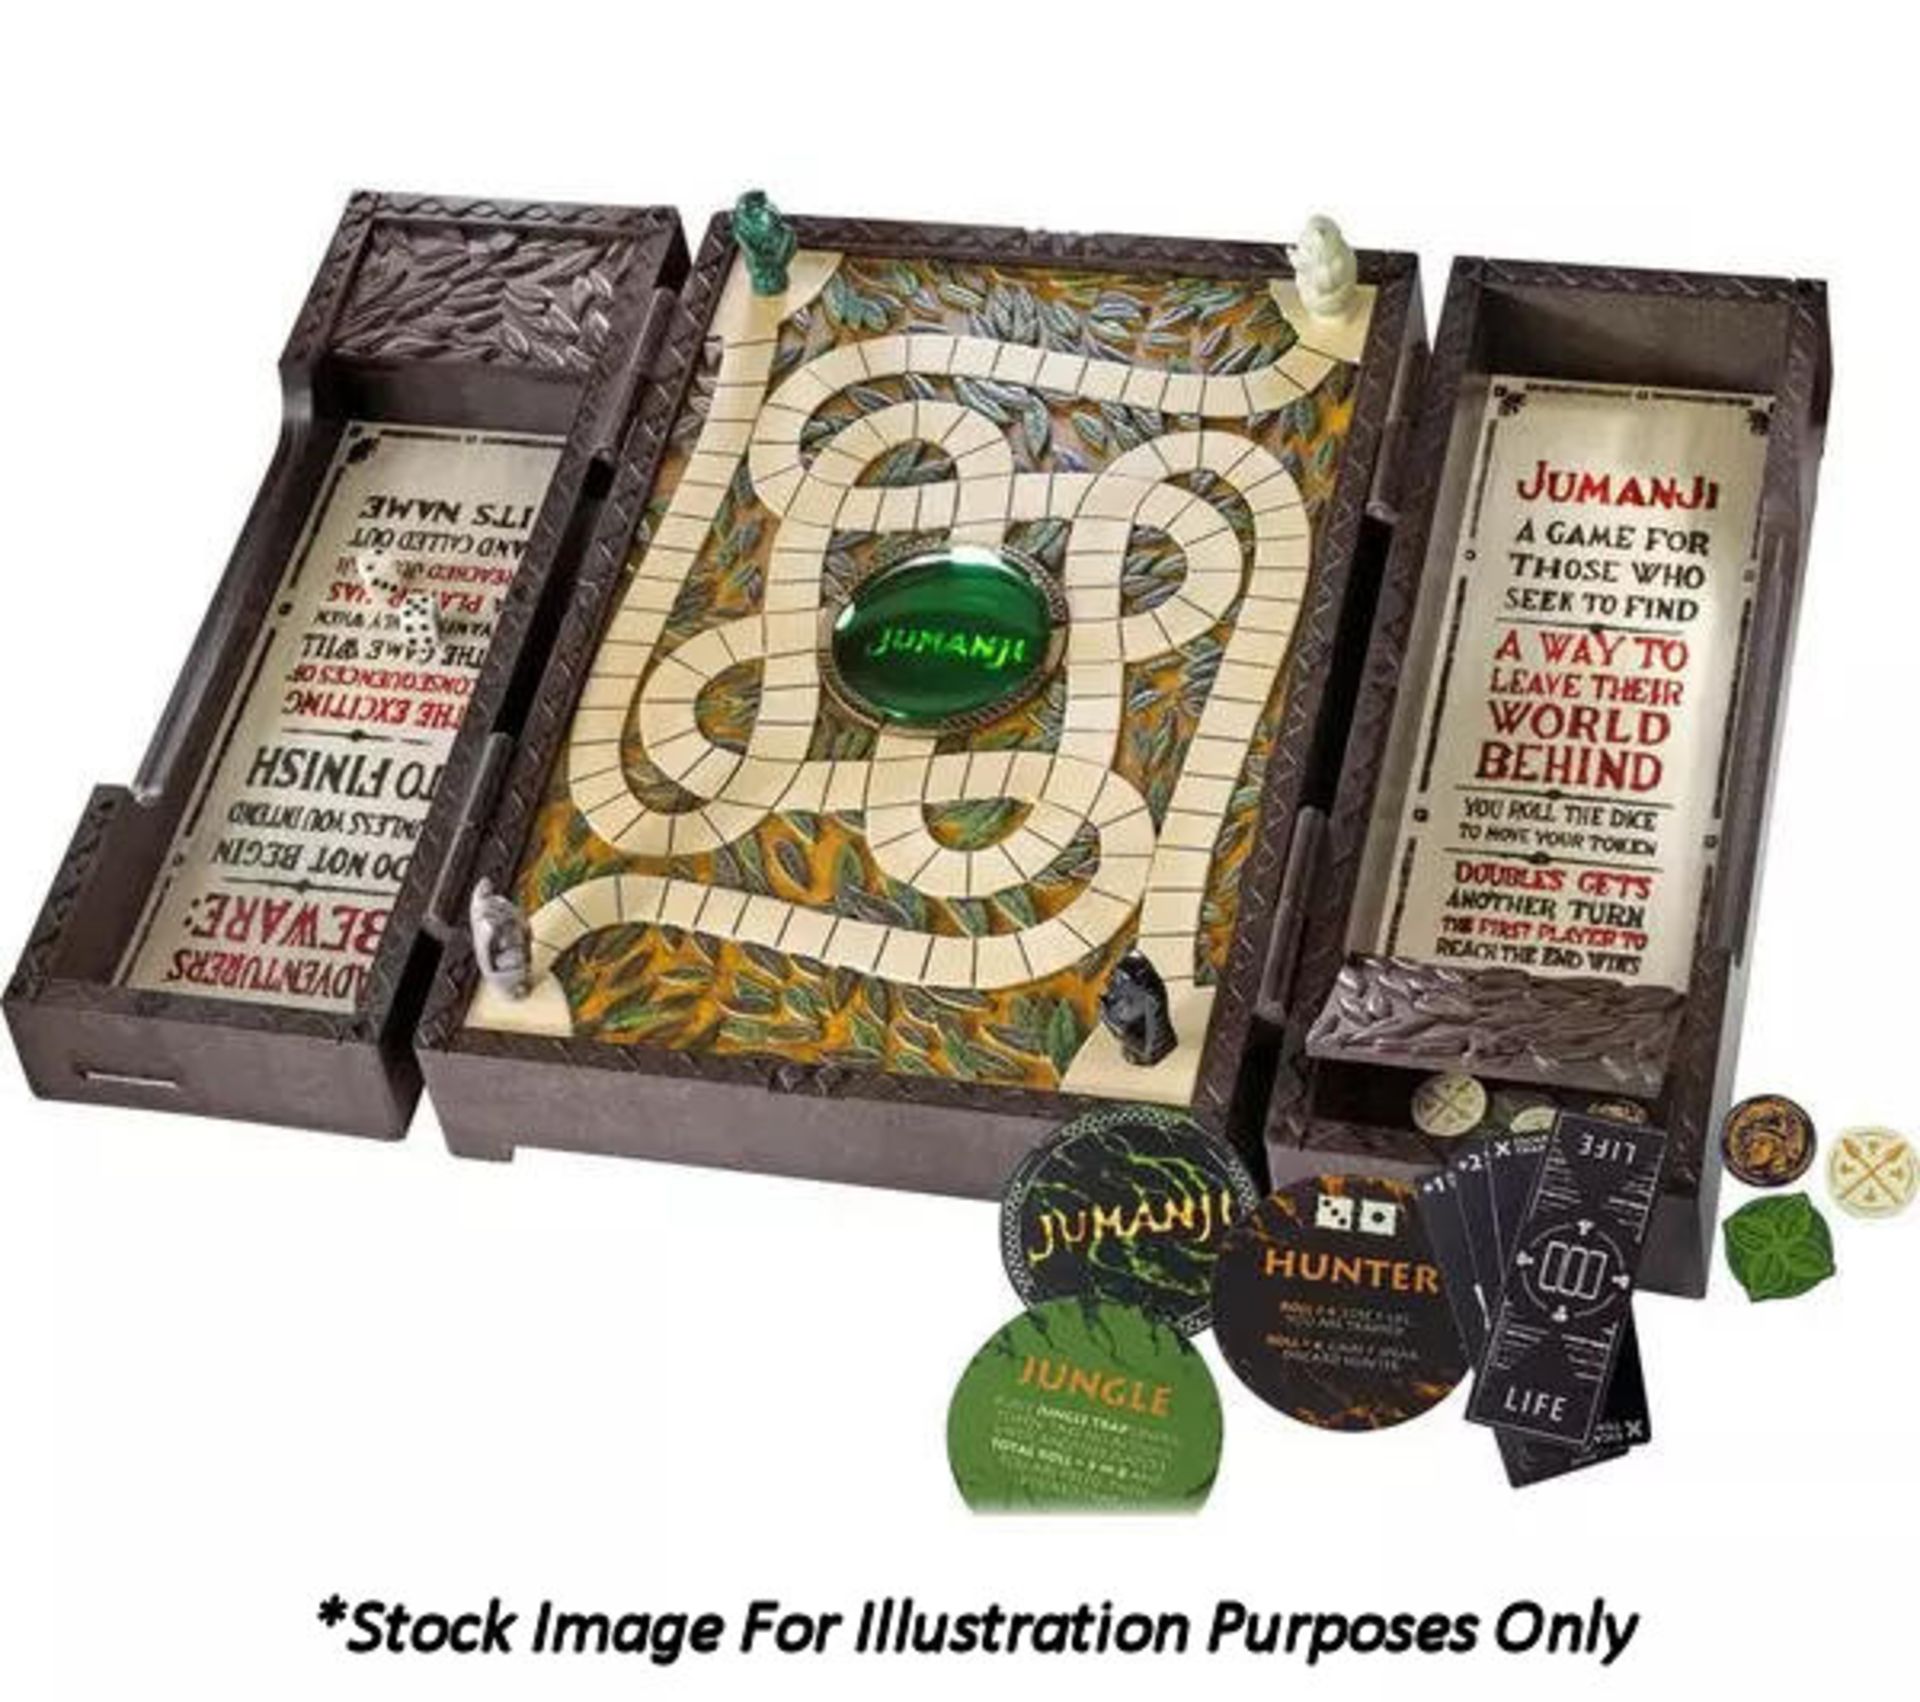 1 x Jumanji Board Game From the Noble Collection - New/Boxed